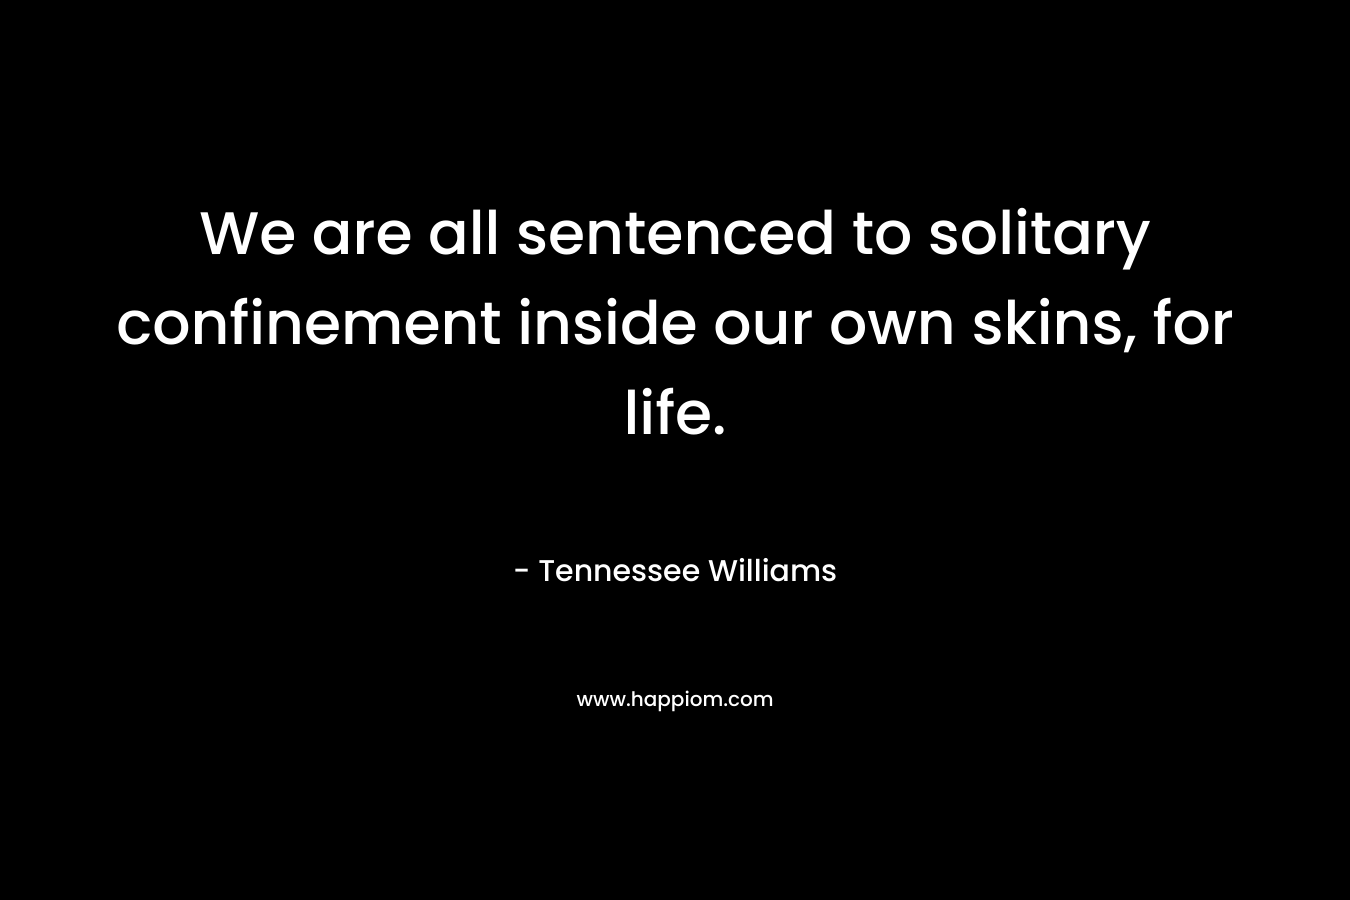 We are all sentenced to solitary confinement inside our own skins, for life. – Tennessee Williams